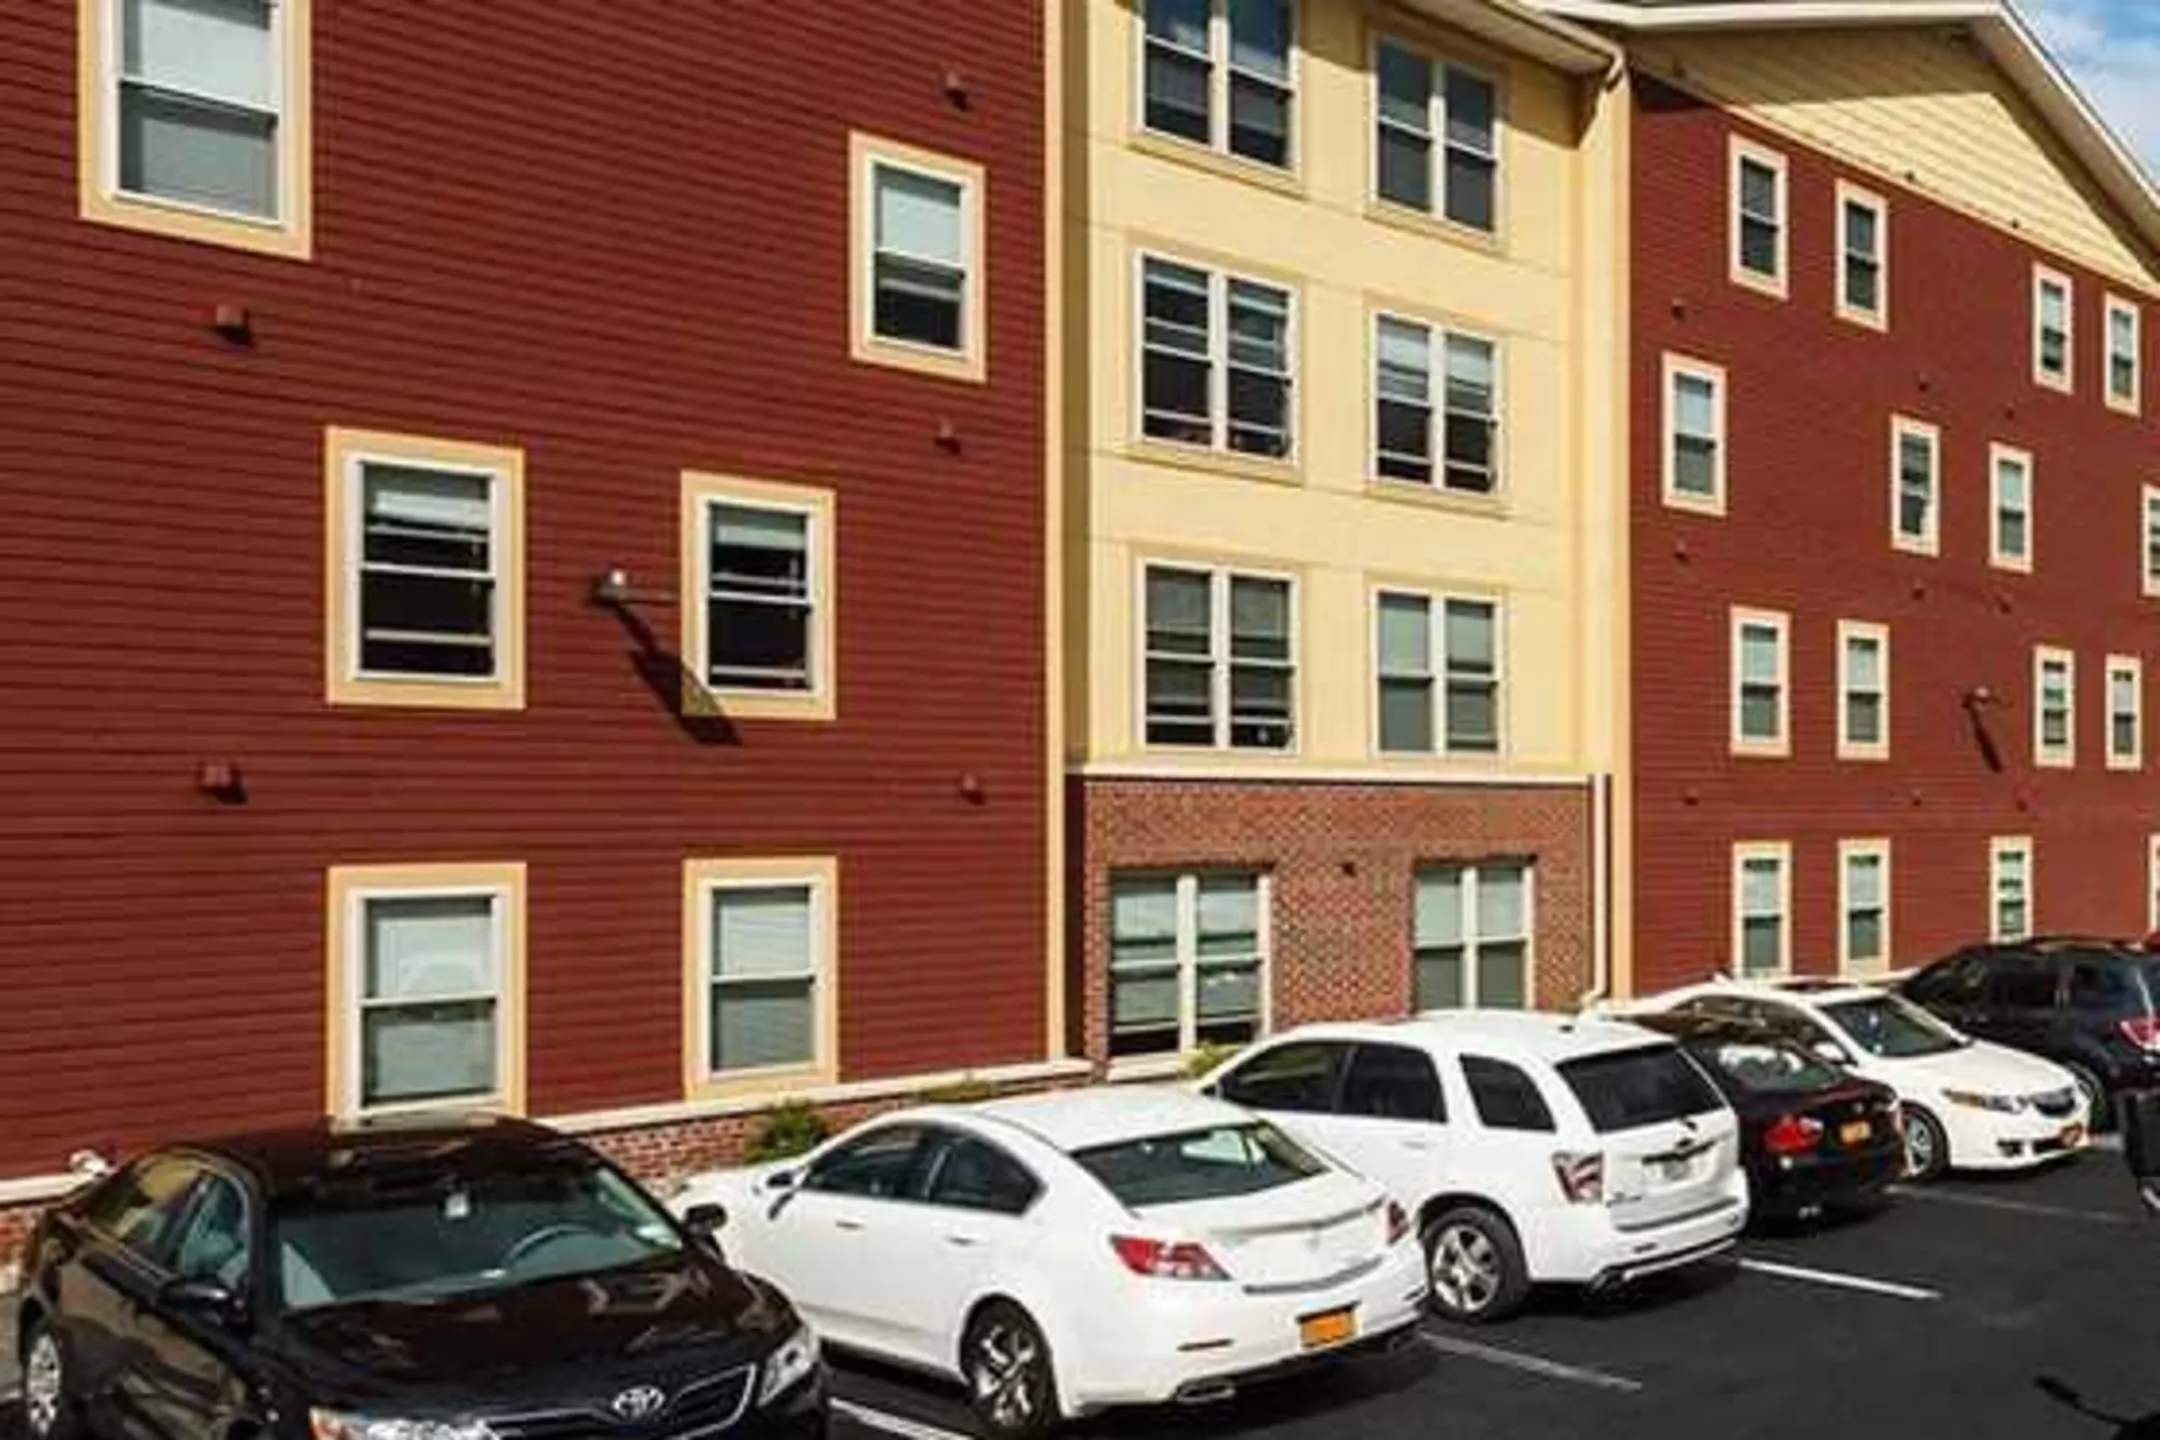 Building - Copper Beech Commons - Per Bed Lease - Syracuse, NY